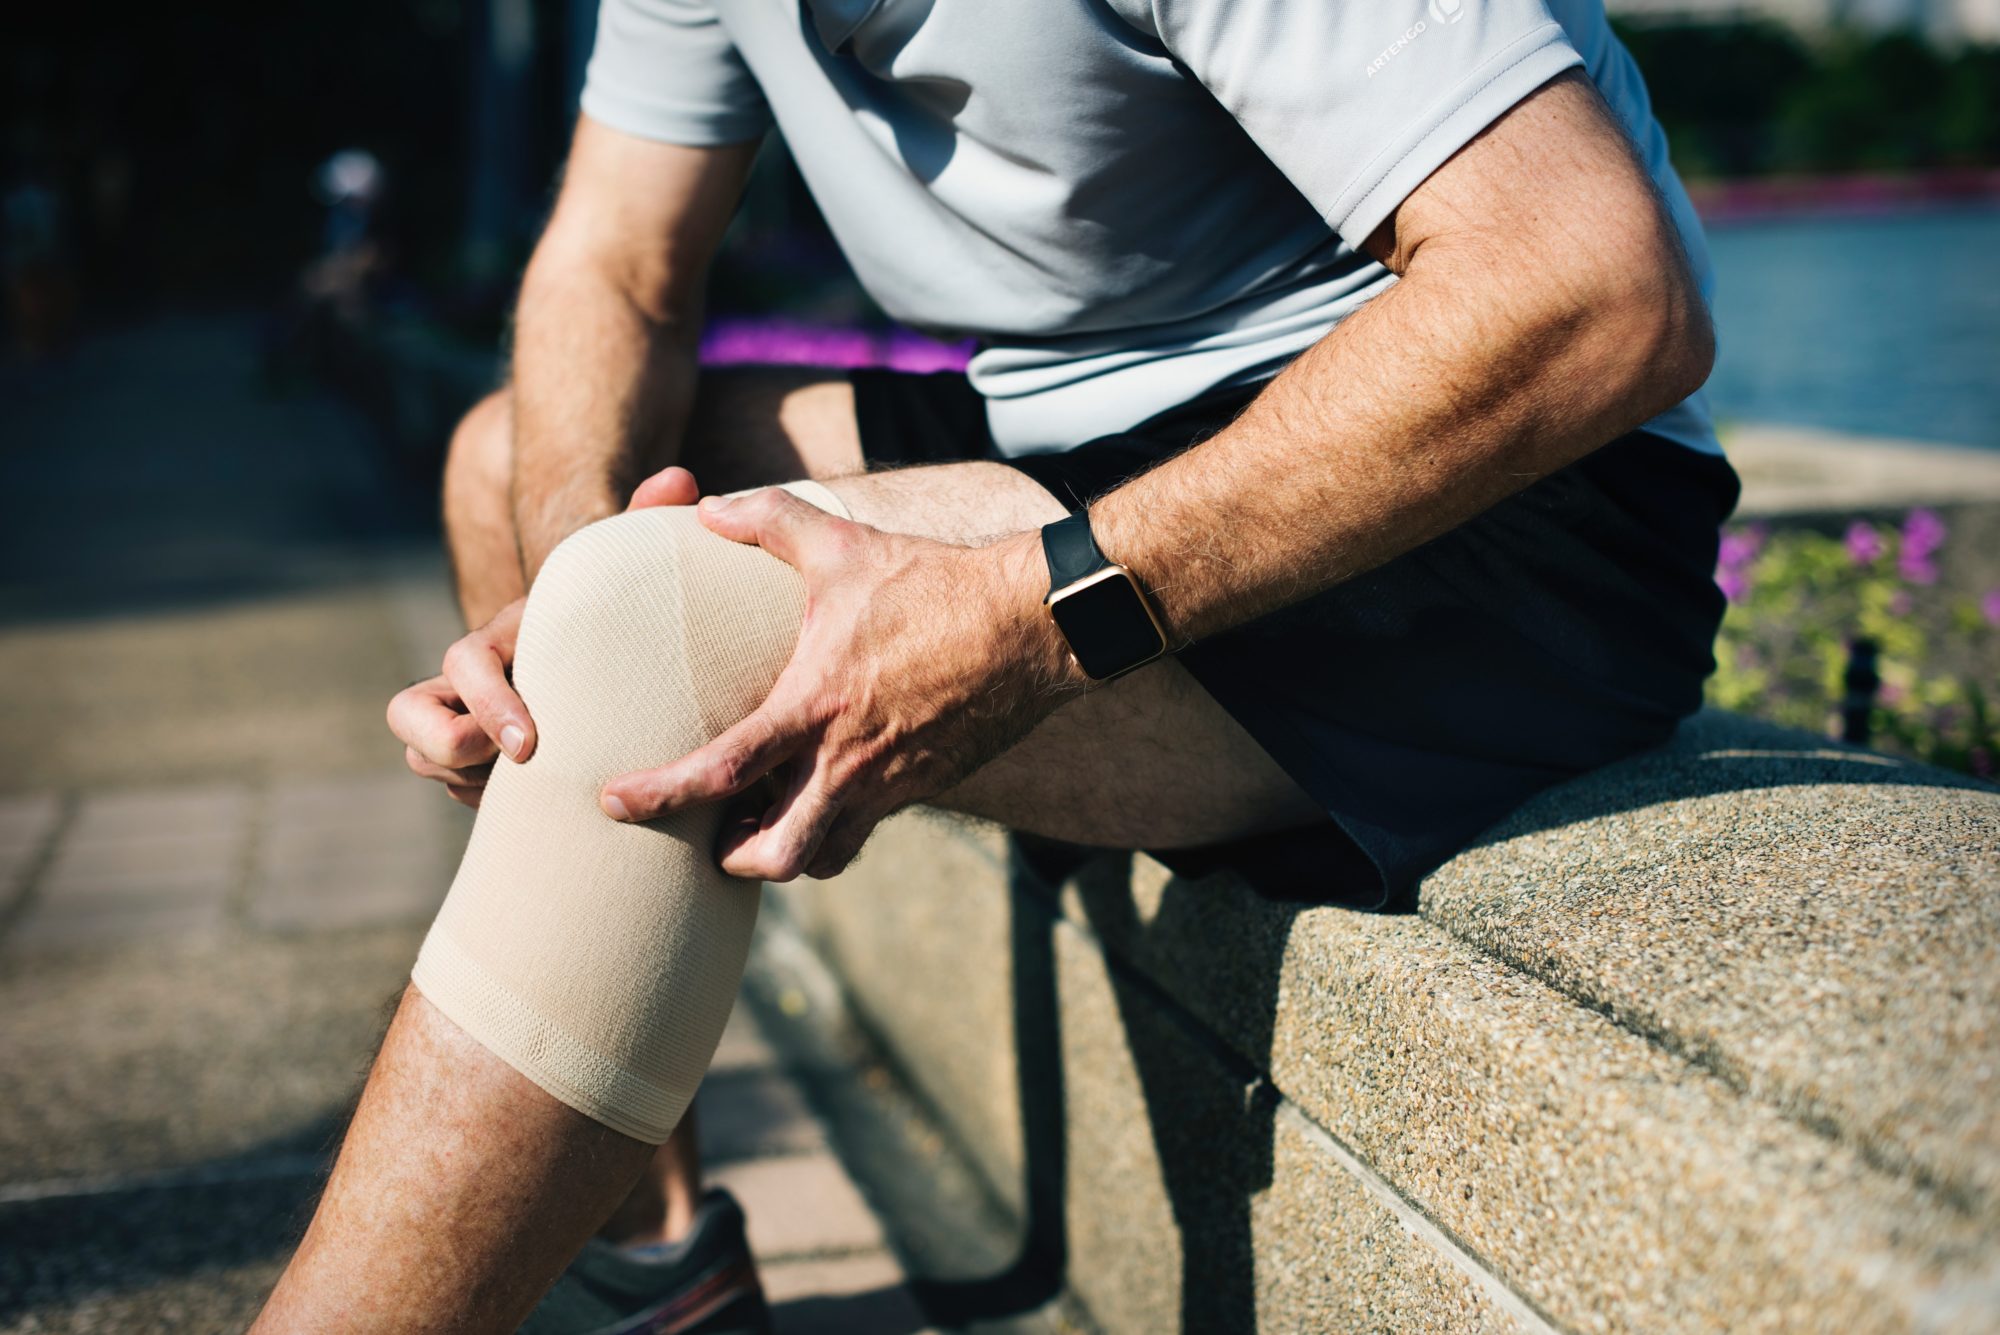 How to aid your parents to cope with a knee injury?